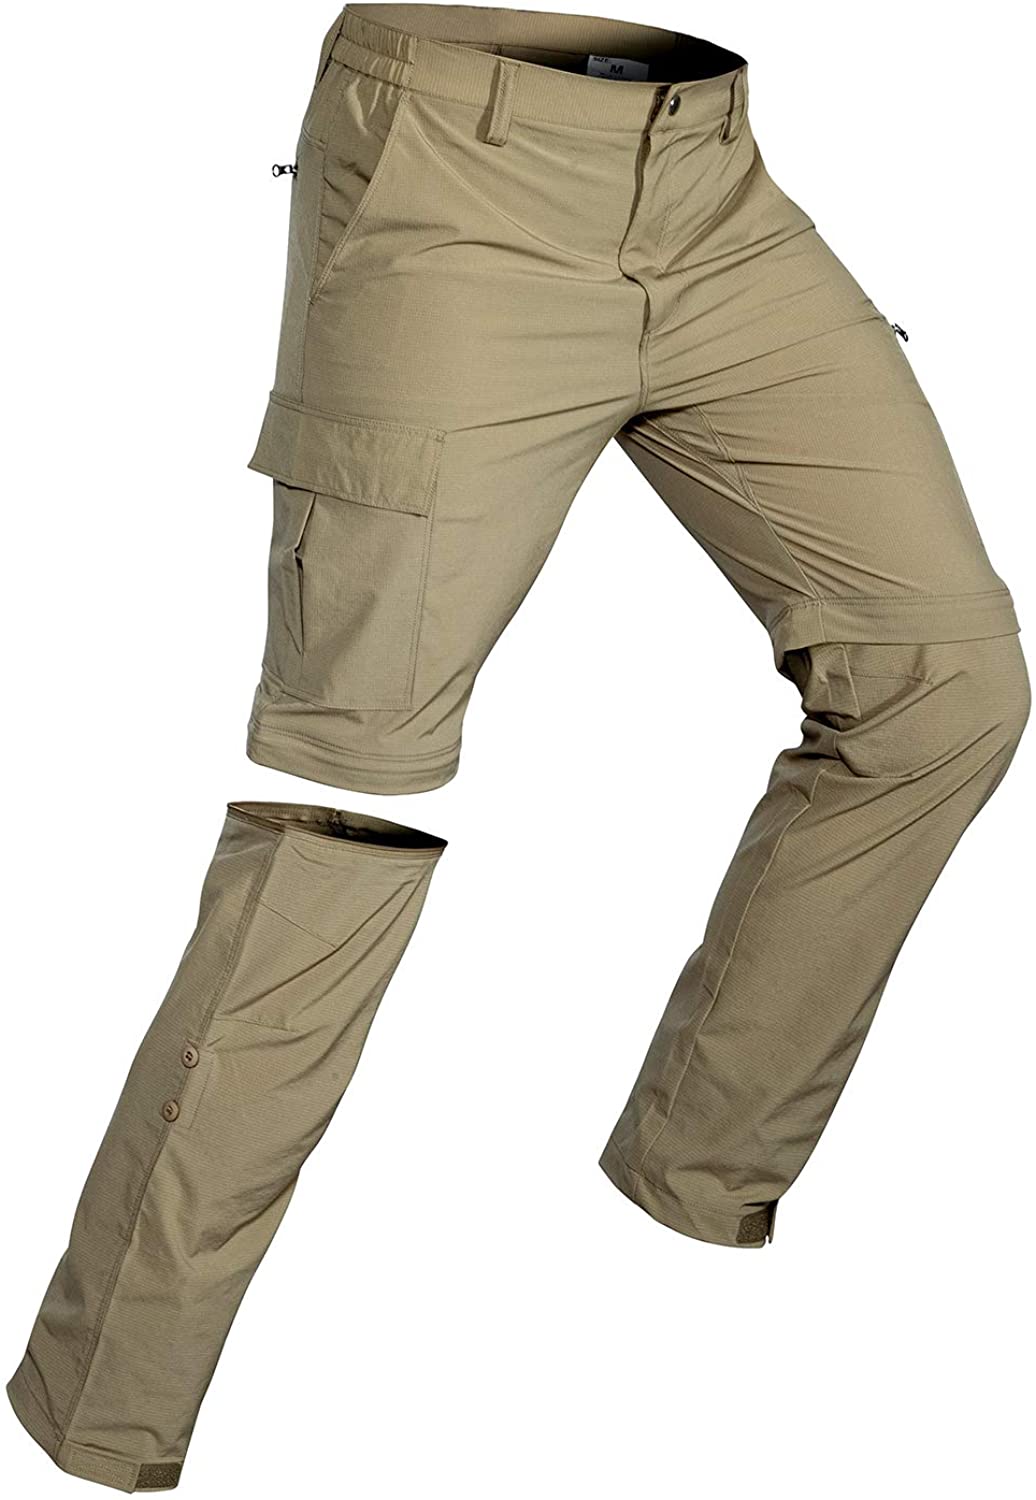 Wespornow Men's-Convertible-Hiking-Pants Quick Dry Lightweight Zip Off Breathable Cargo Pants for Outdoor, Fishing, Safari Khaki / Small